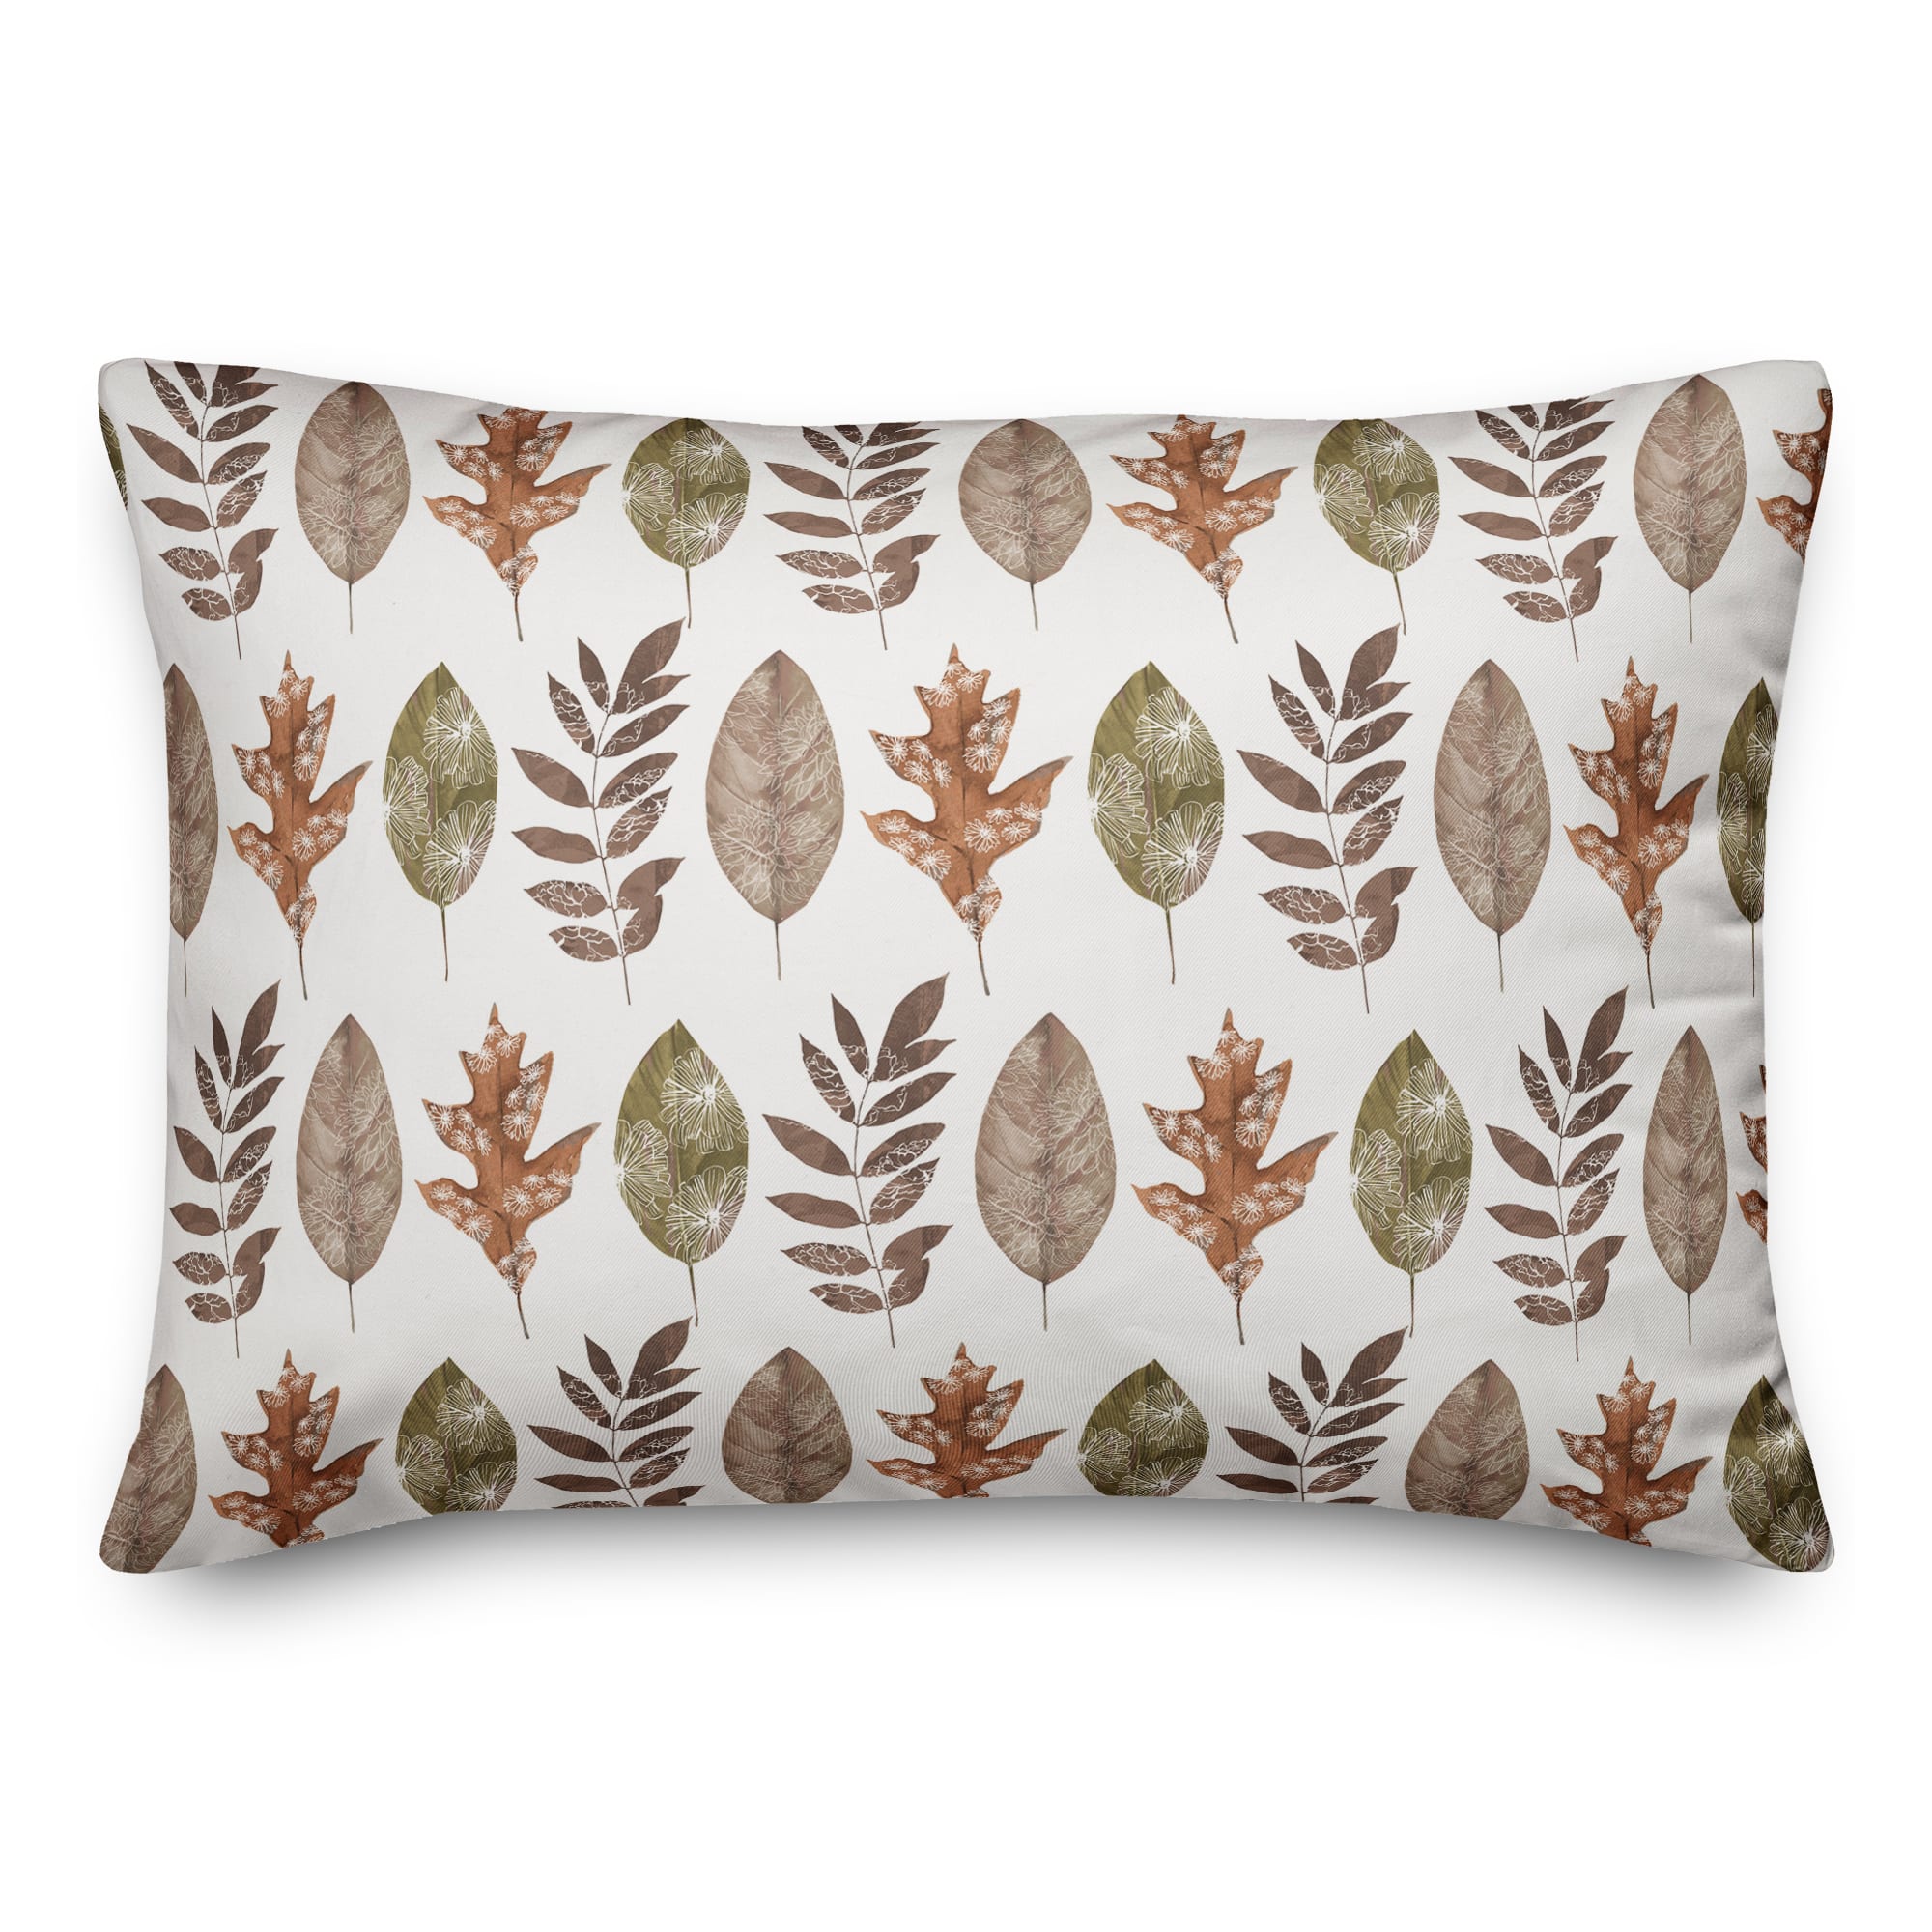 Fall Leaf Pattern Indoor/Outdoor Pillow